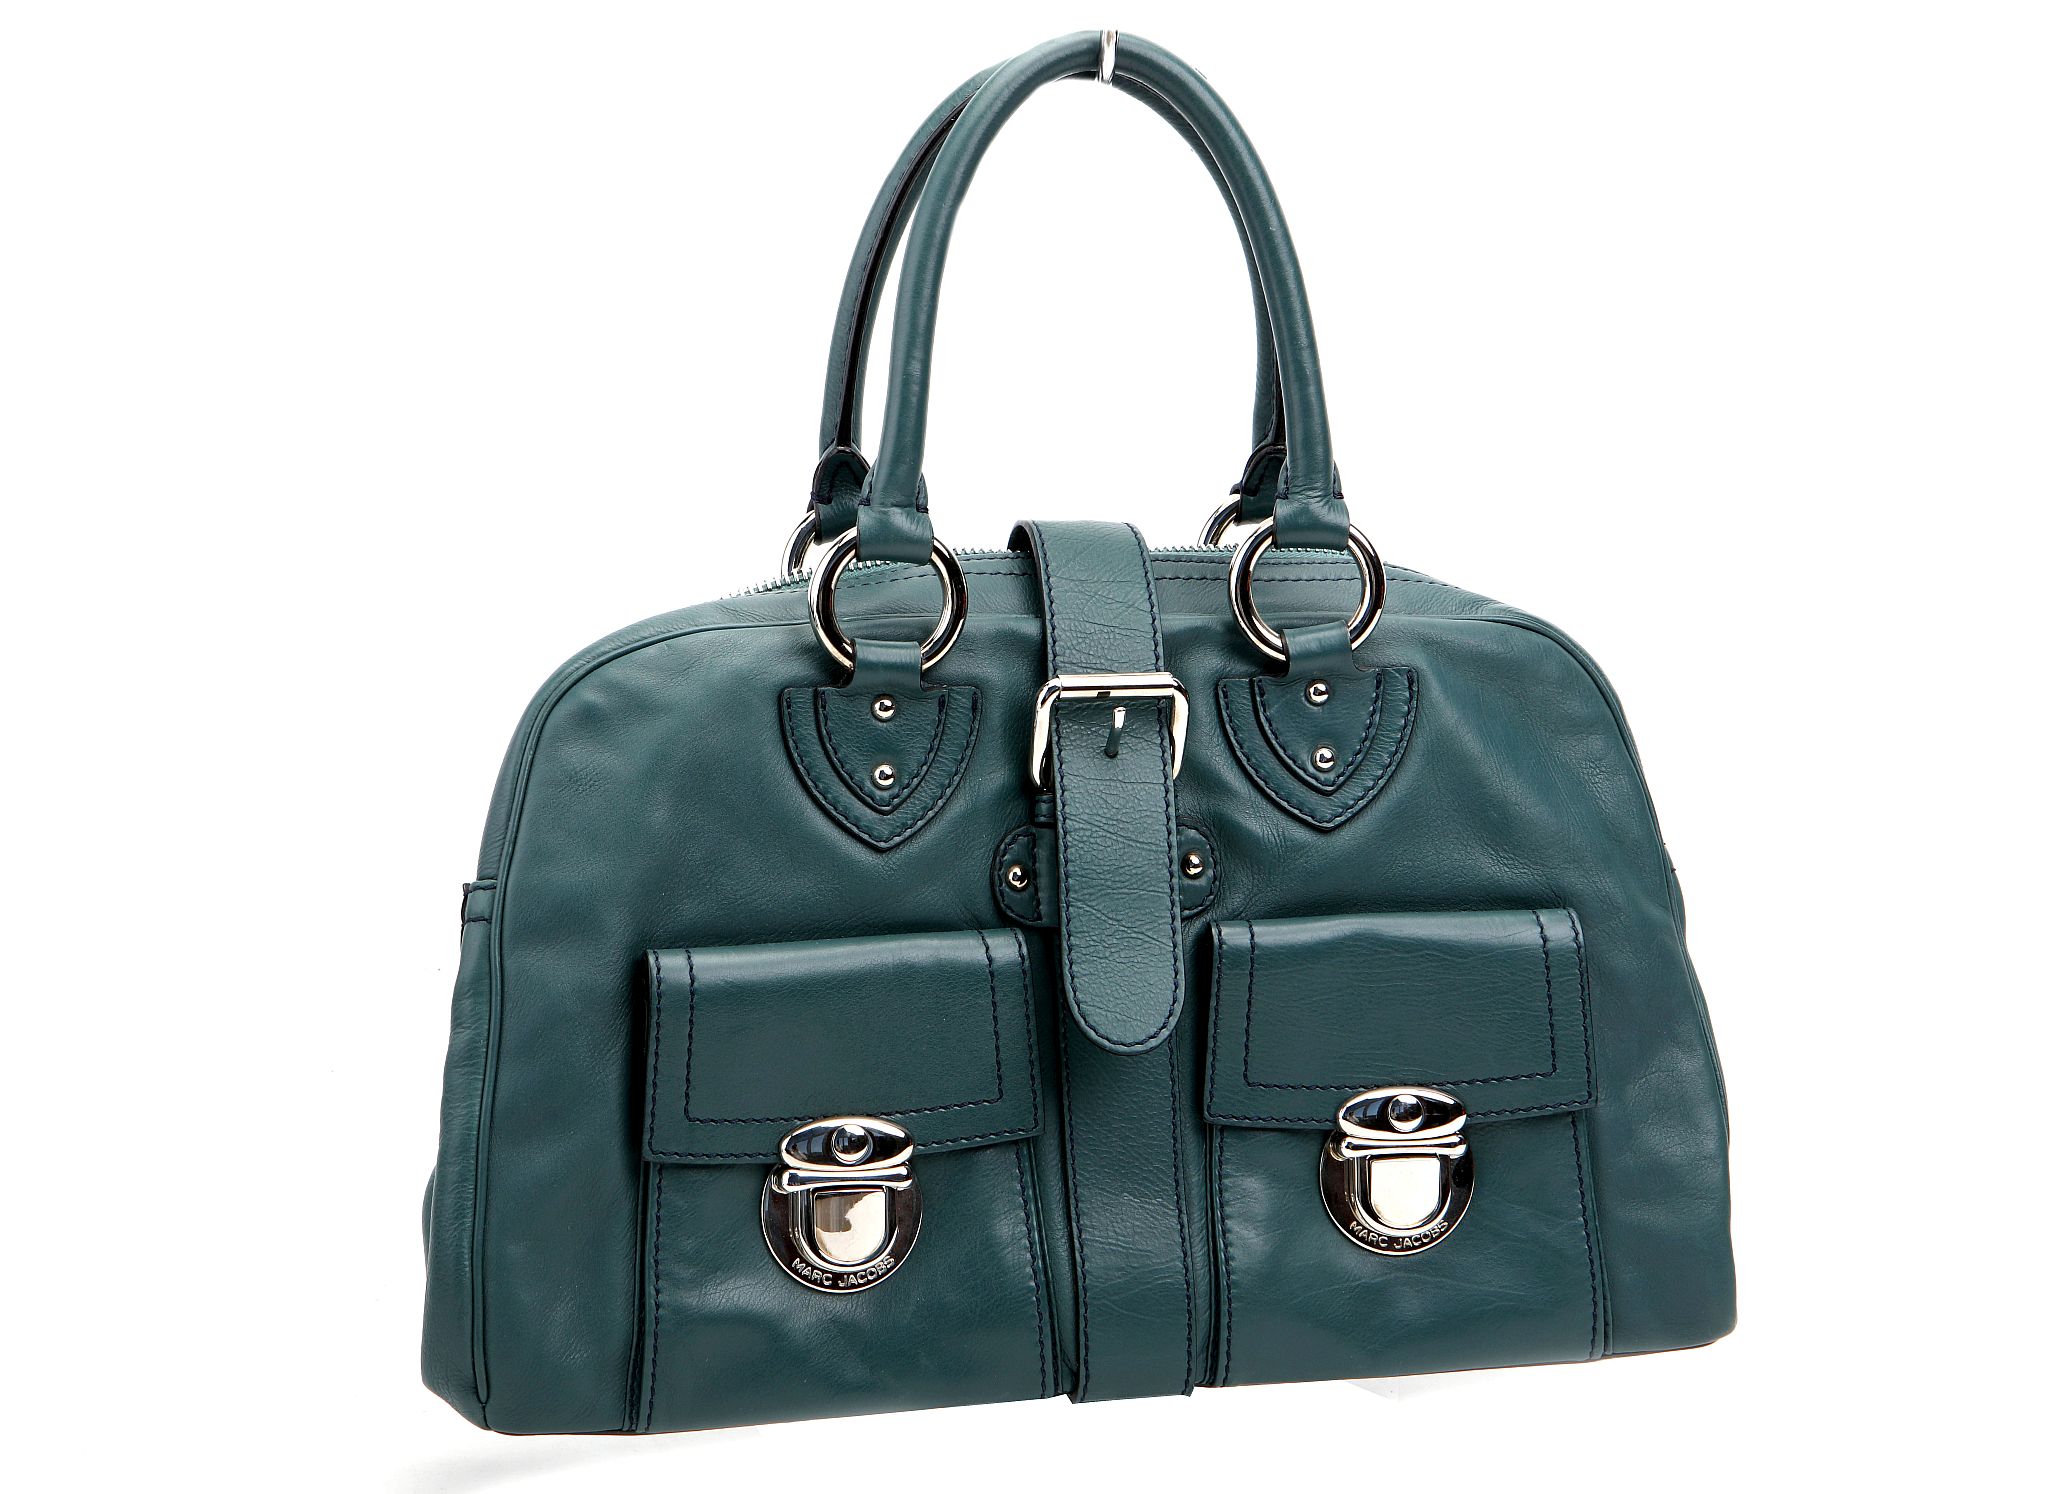 MARC JACOBS VENETIA HANDBAG, teal leather with silver hardware, 38cm wide, 23cm high, with dust bag - Image 2 of 12